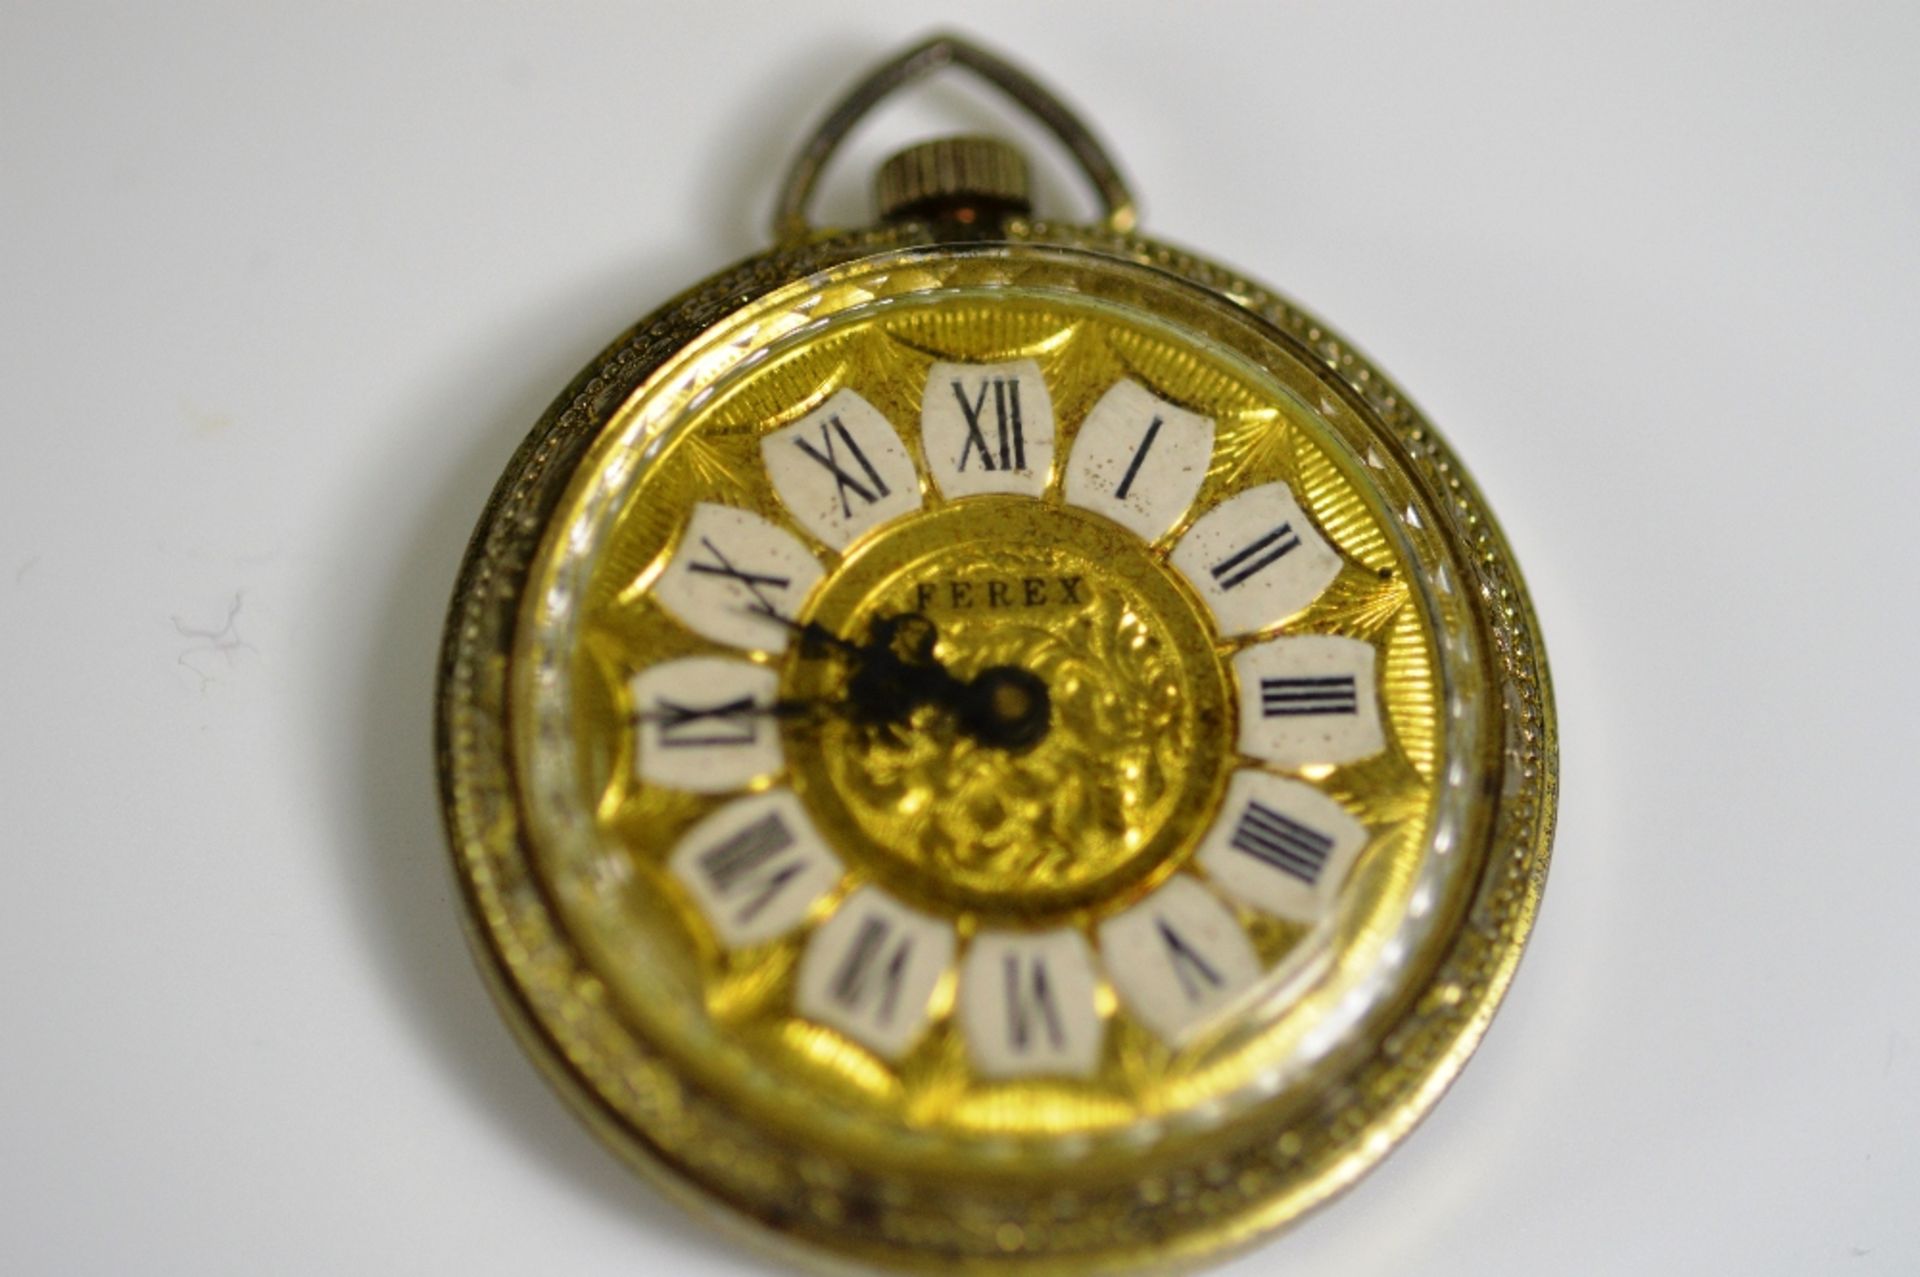 An antique gold plated pocket watch - Image 3 of 3